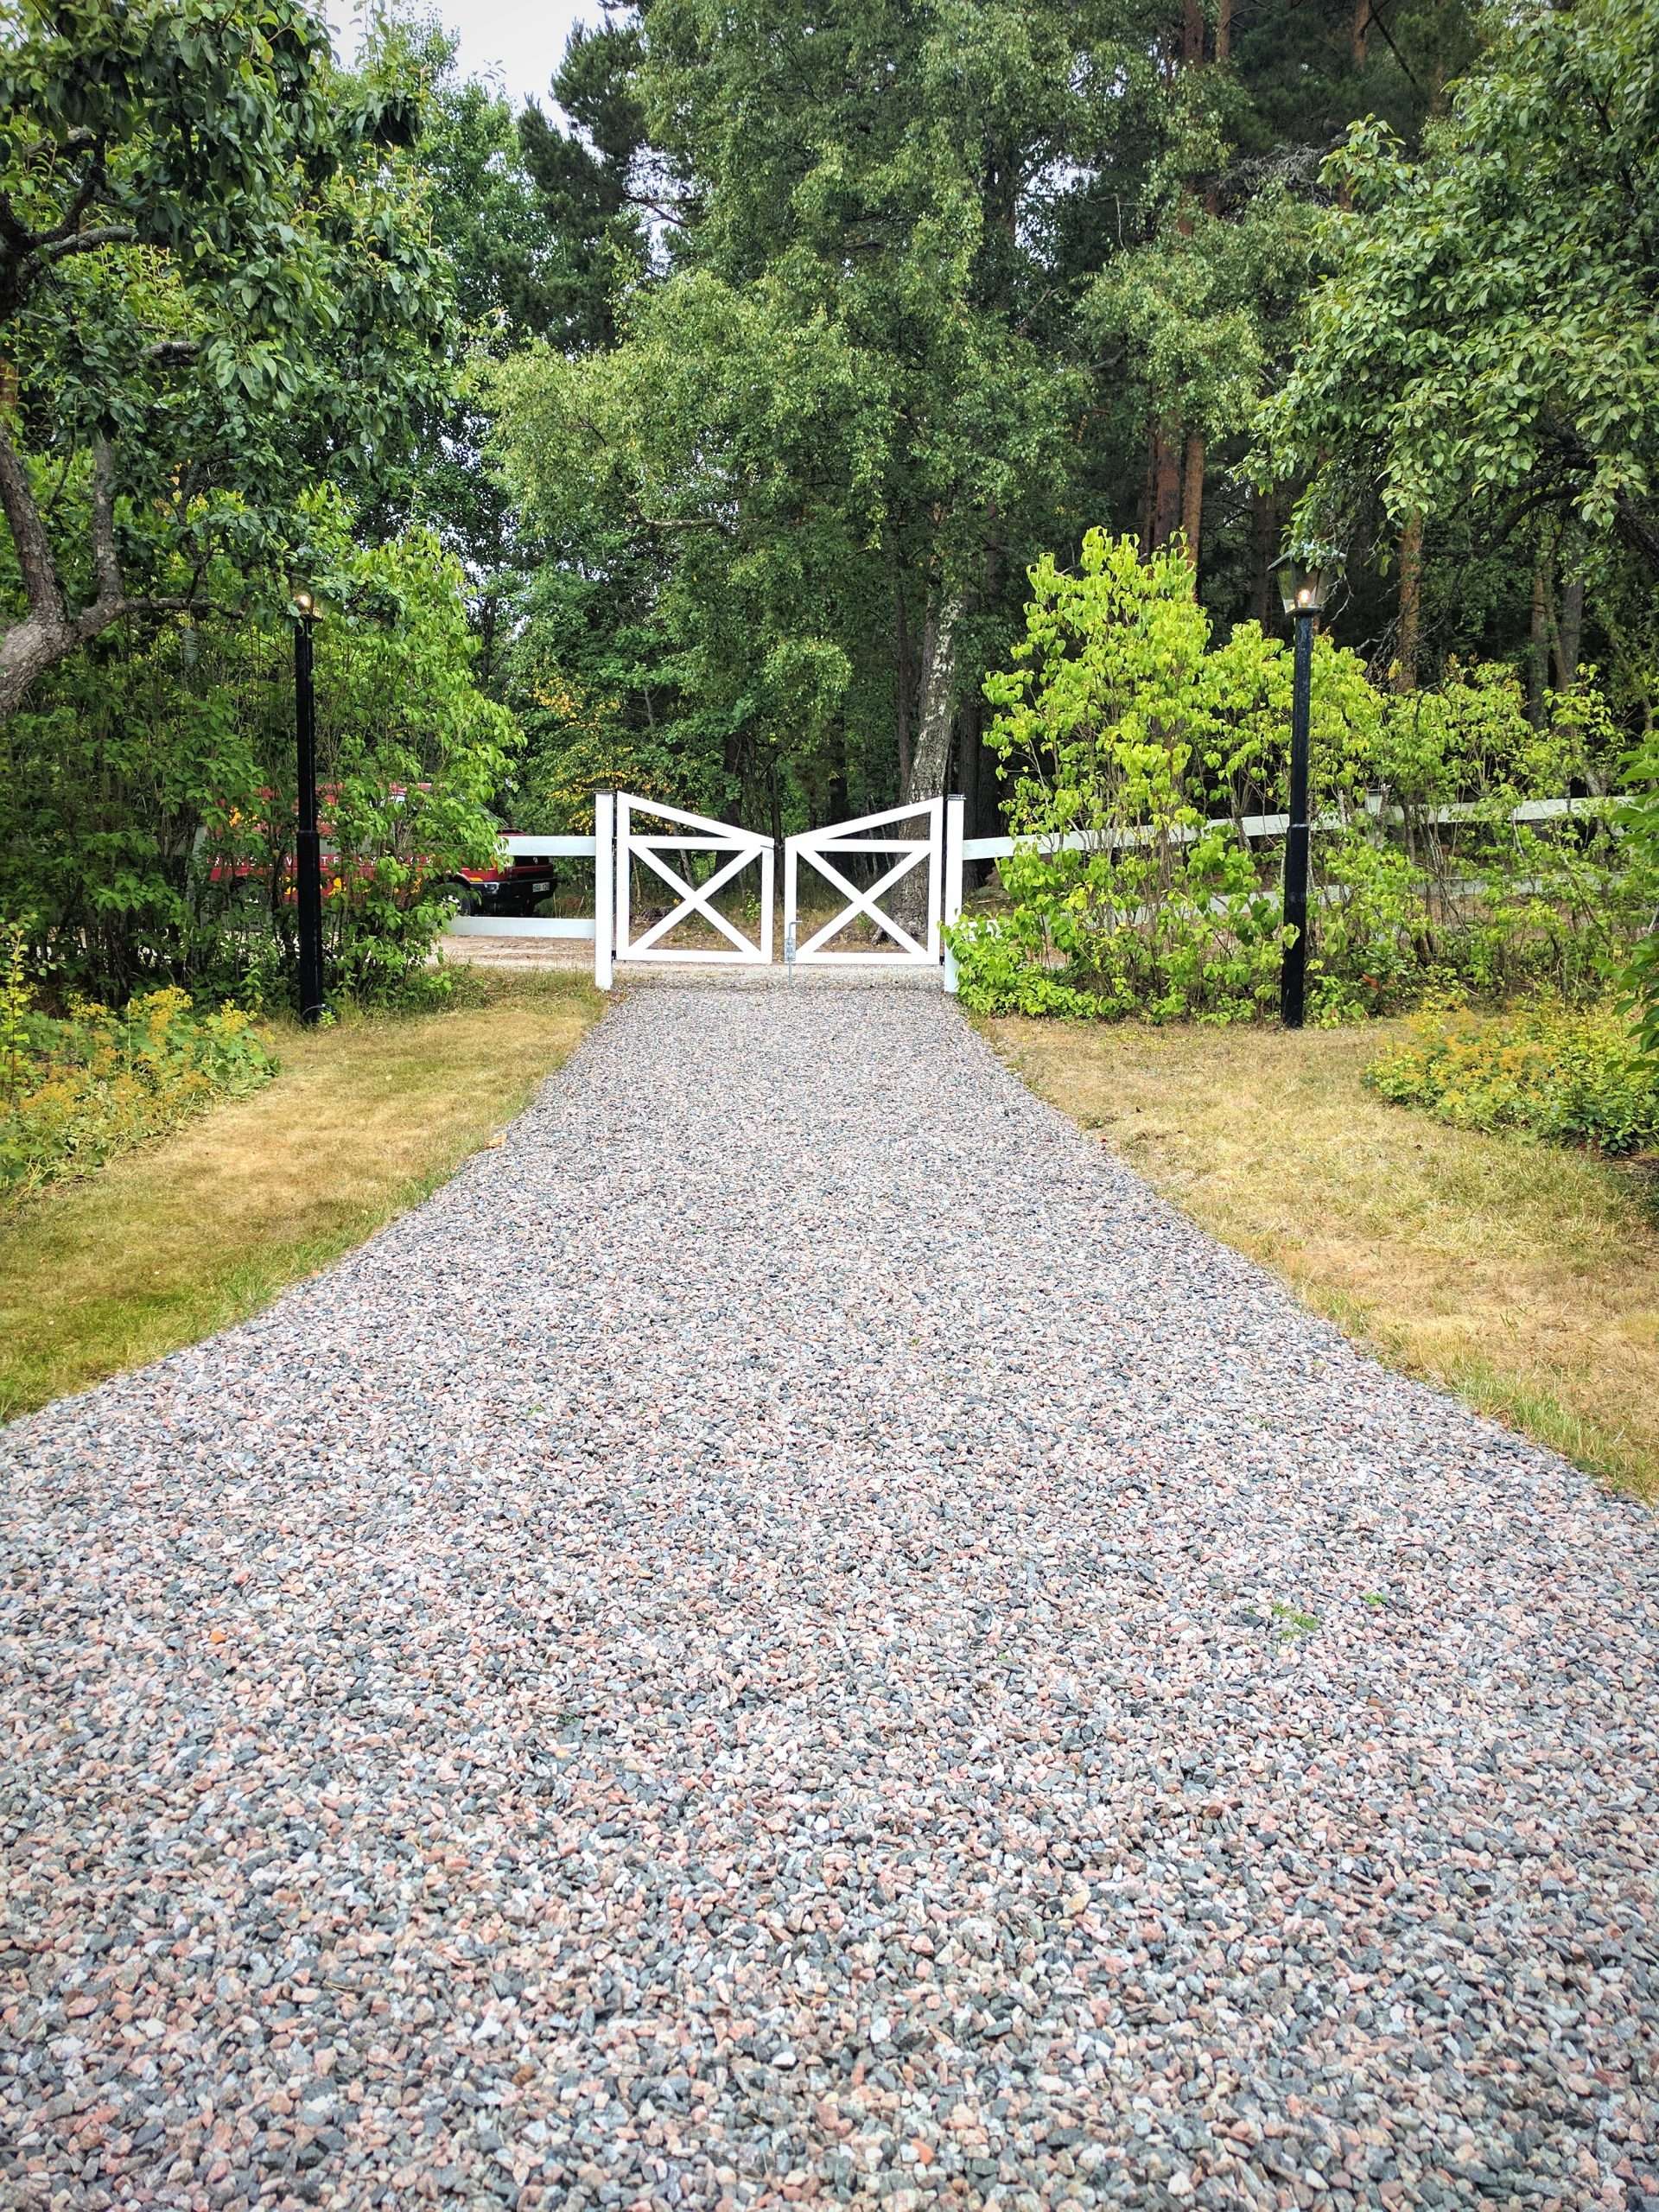 Perfectly Paved Perfection driveway entrance